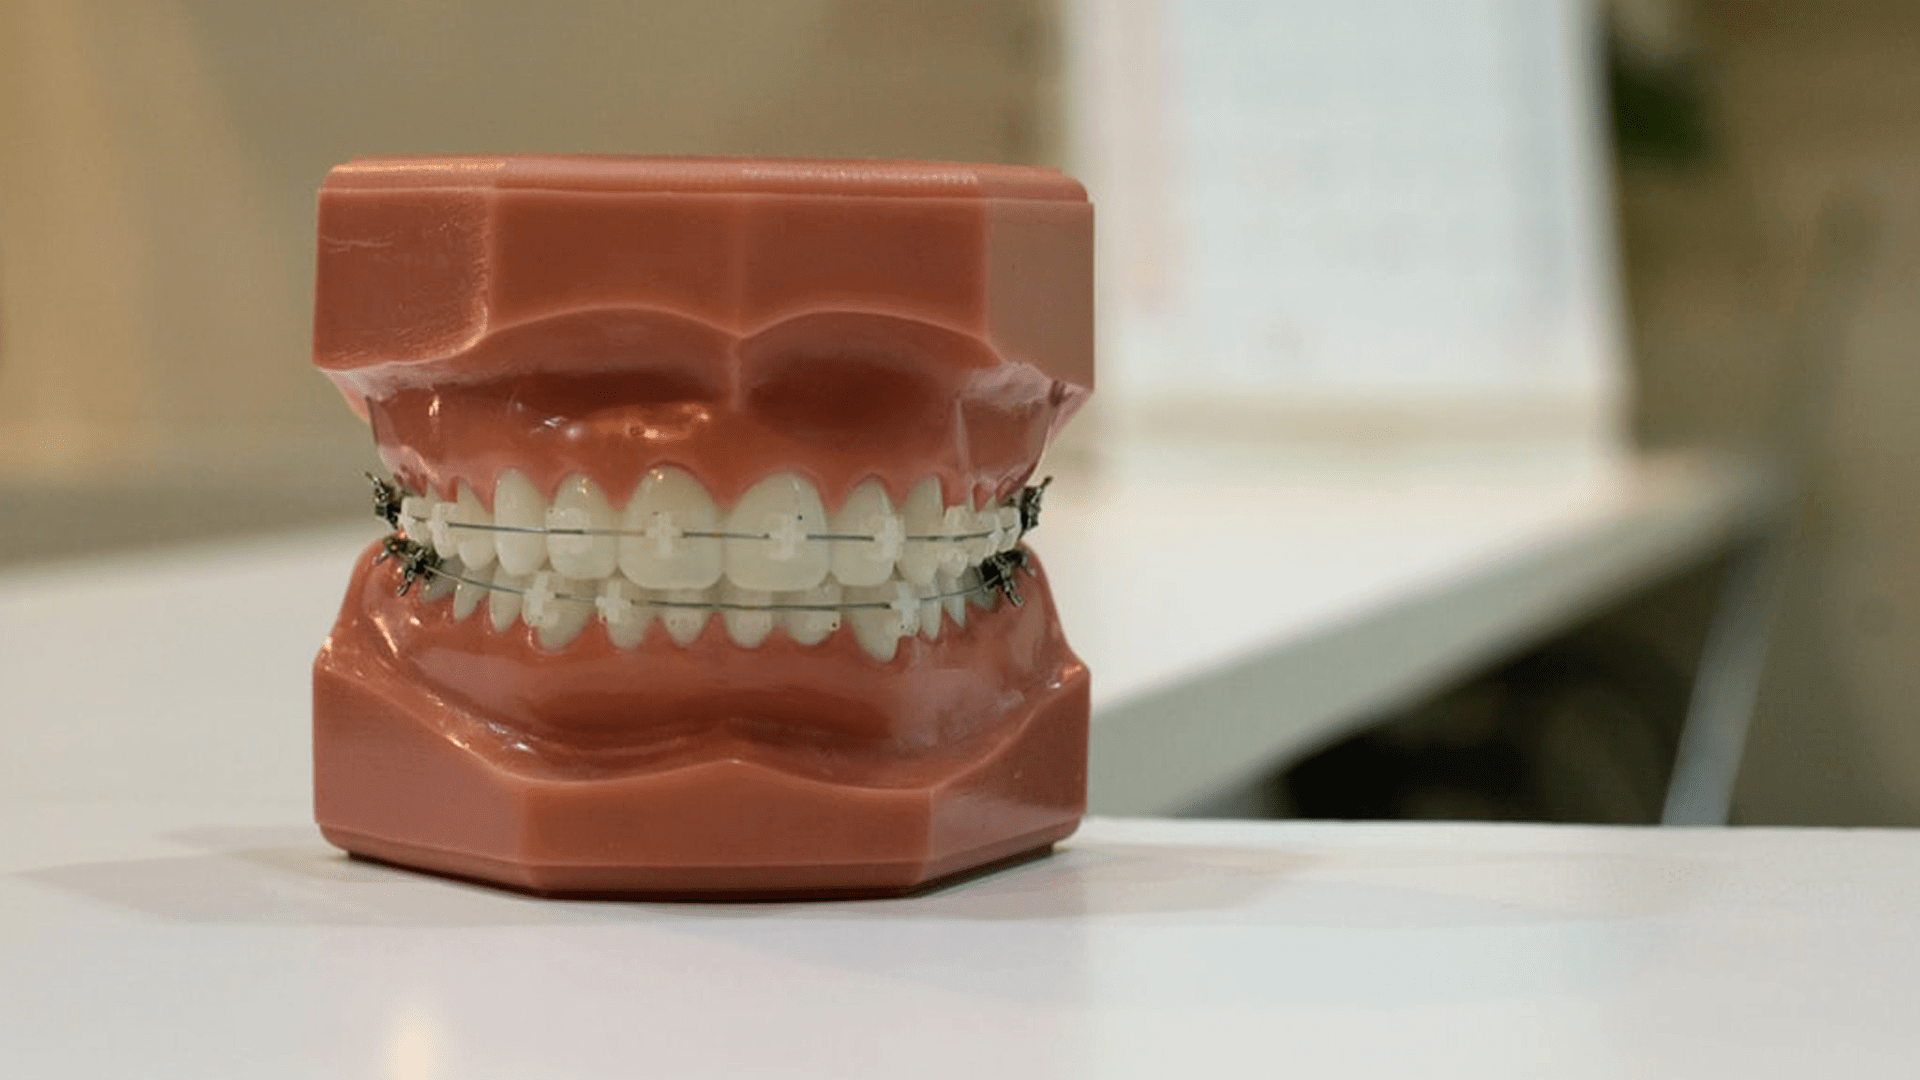 A mold of a human mouth with teeth